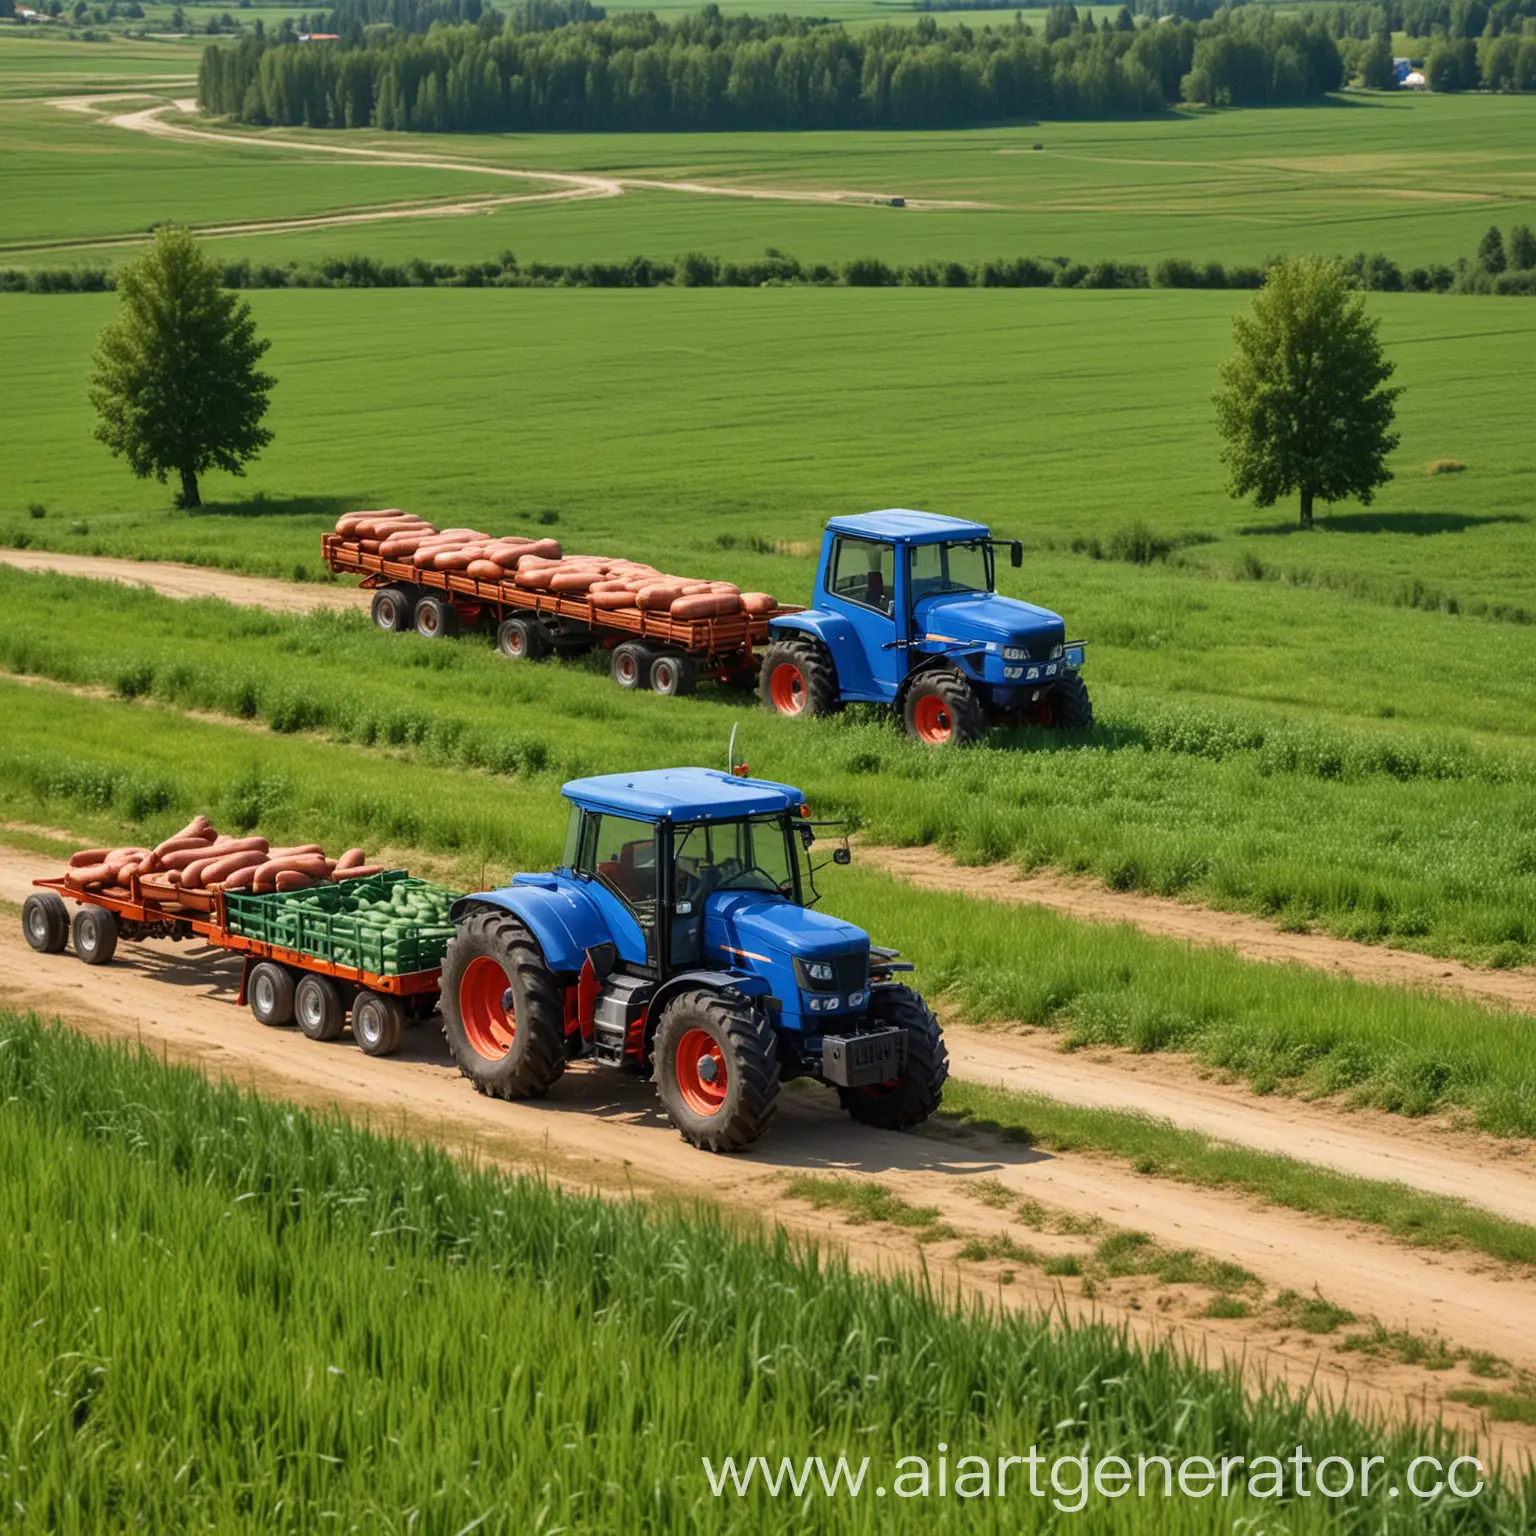 Rural-Landscape-Blue-Tractor-Carrying-Giant-Sausage-in-Trailer